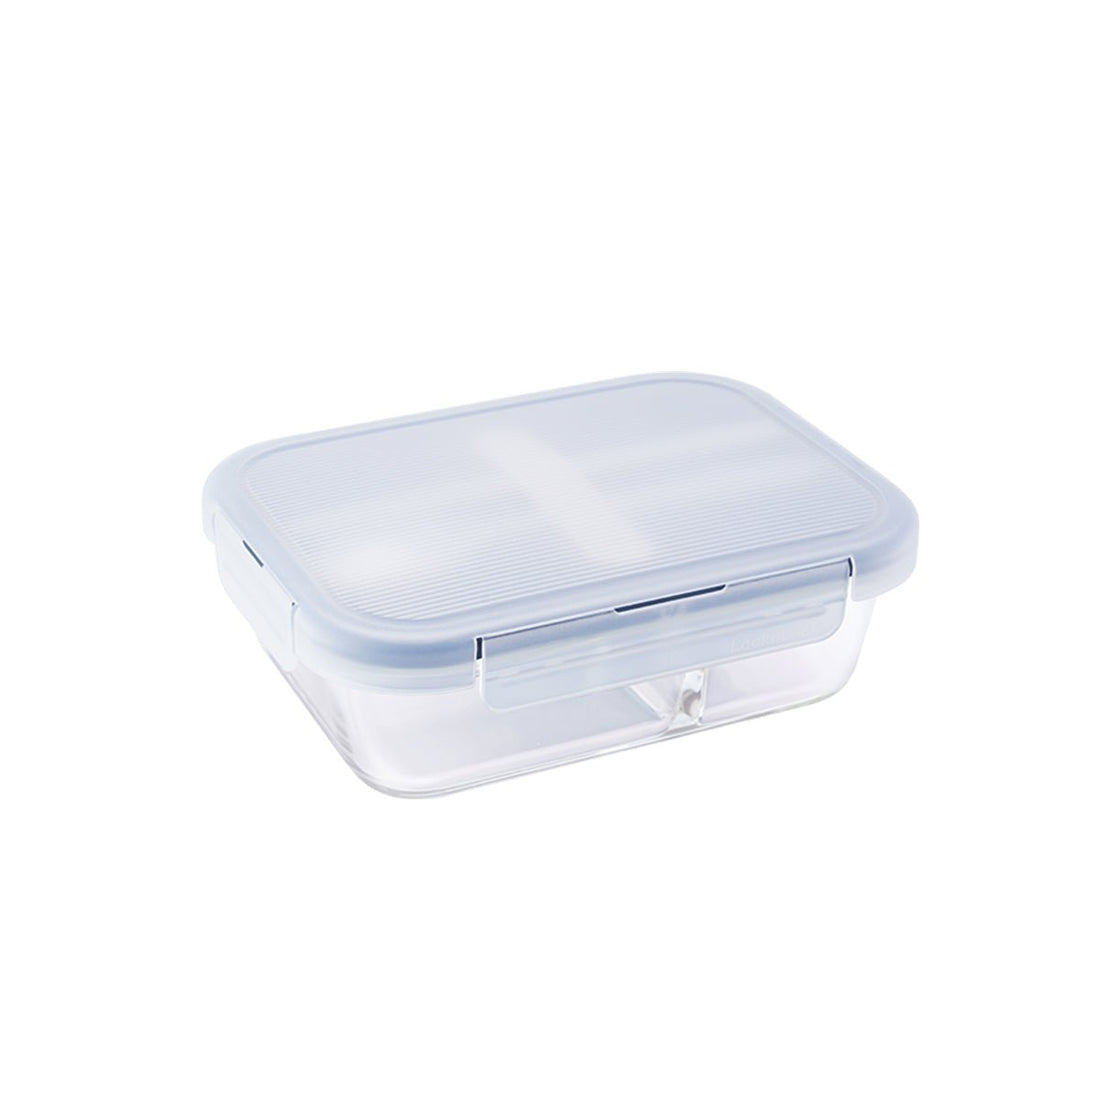 Two Compartment 930ml Microwave Oven Safe Navy Glass Lunch Box With Cutlery - 0cm